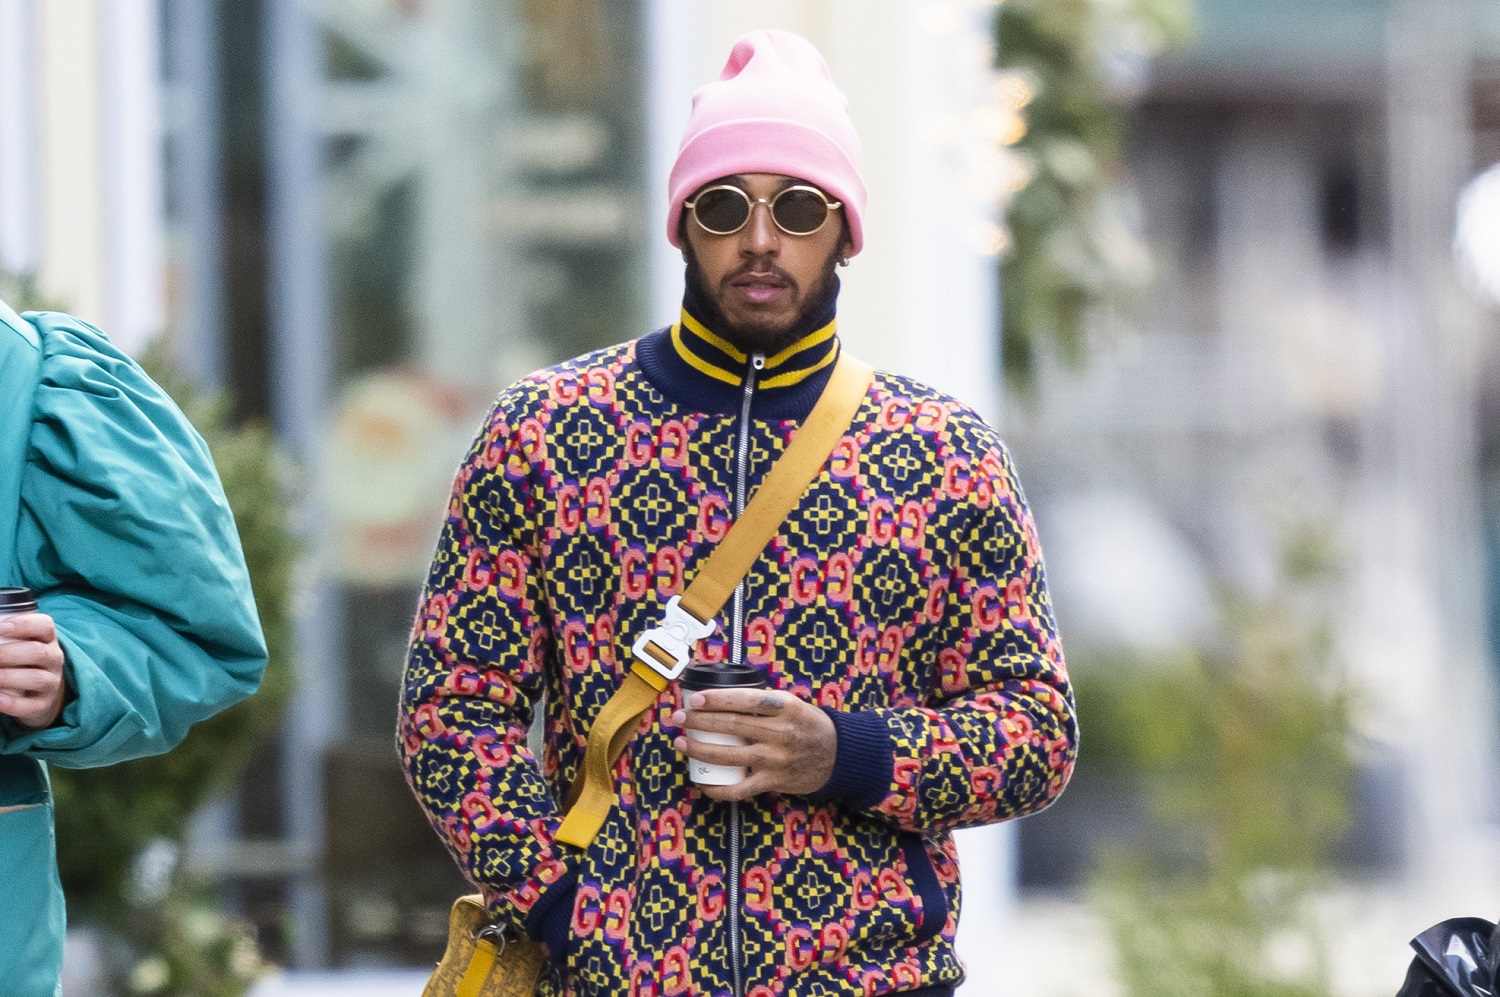 Lewis Hamilton, who has kept a low profile since the conclusion of the Formula 1 season in December, is seen in Tribeca on Feb. 5, 2022, in New York City. | Gotham/GC Images